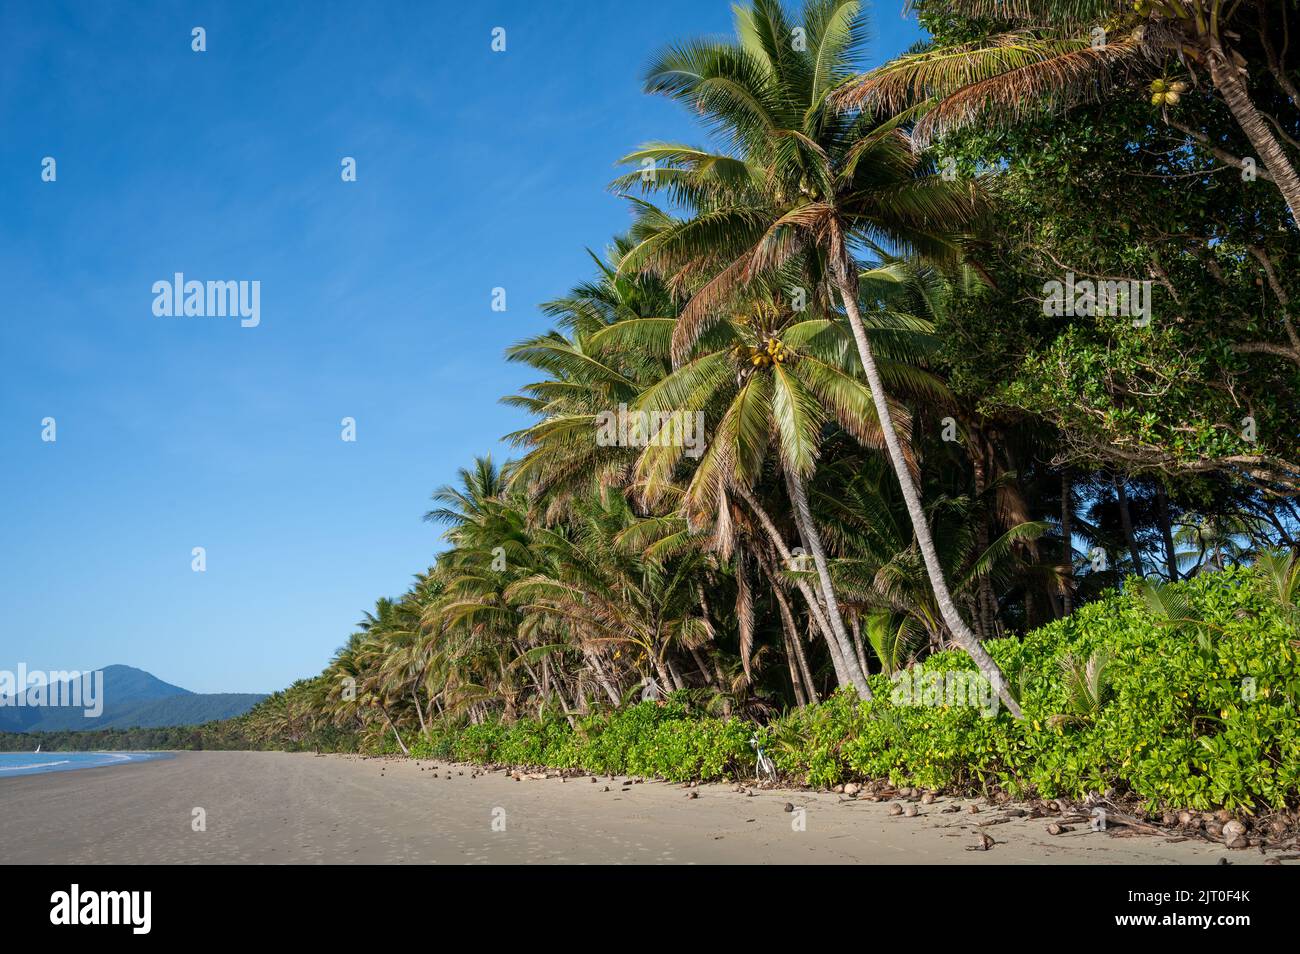 The coconut-lined 4-mile beach resort on a beautiful blue sky day at Port Douglas bordering the Sheraton Mirage Resort in Queensland, Australia. Stock Photo